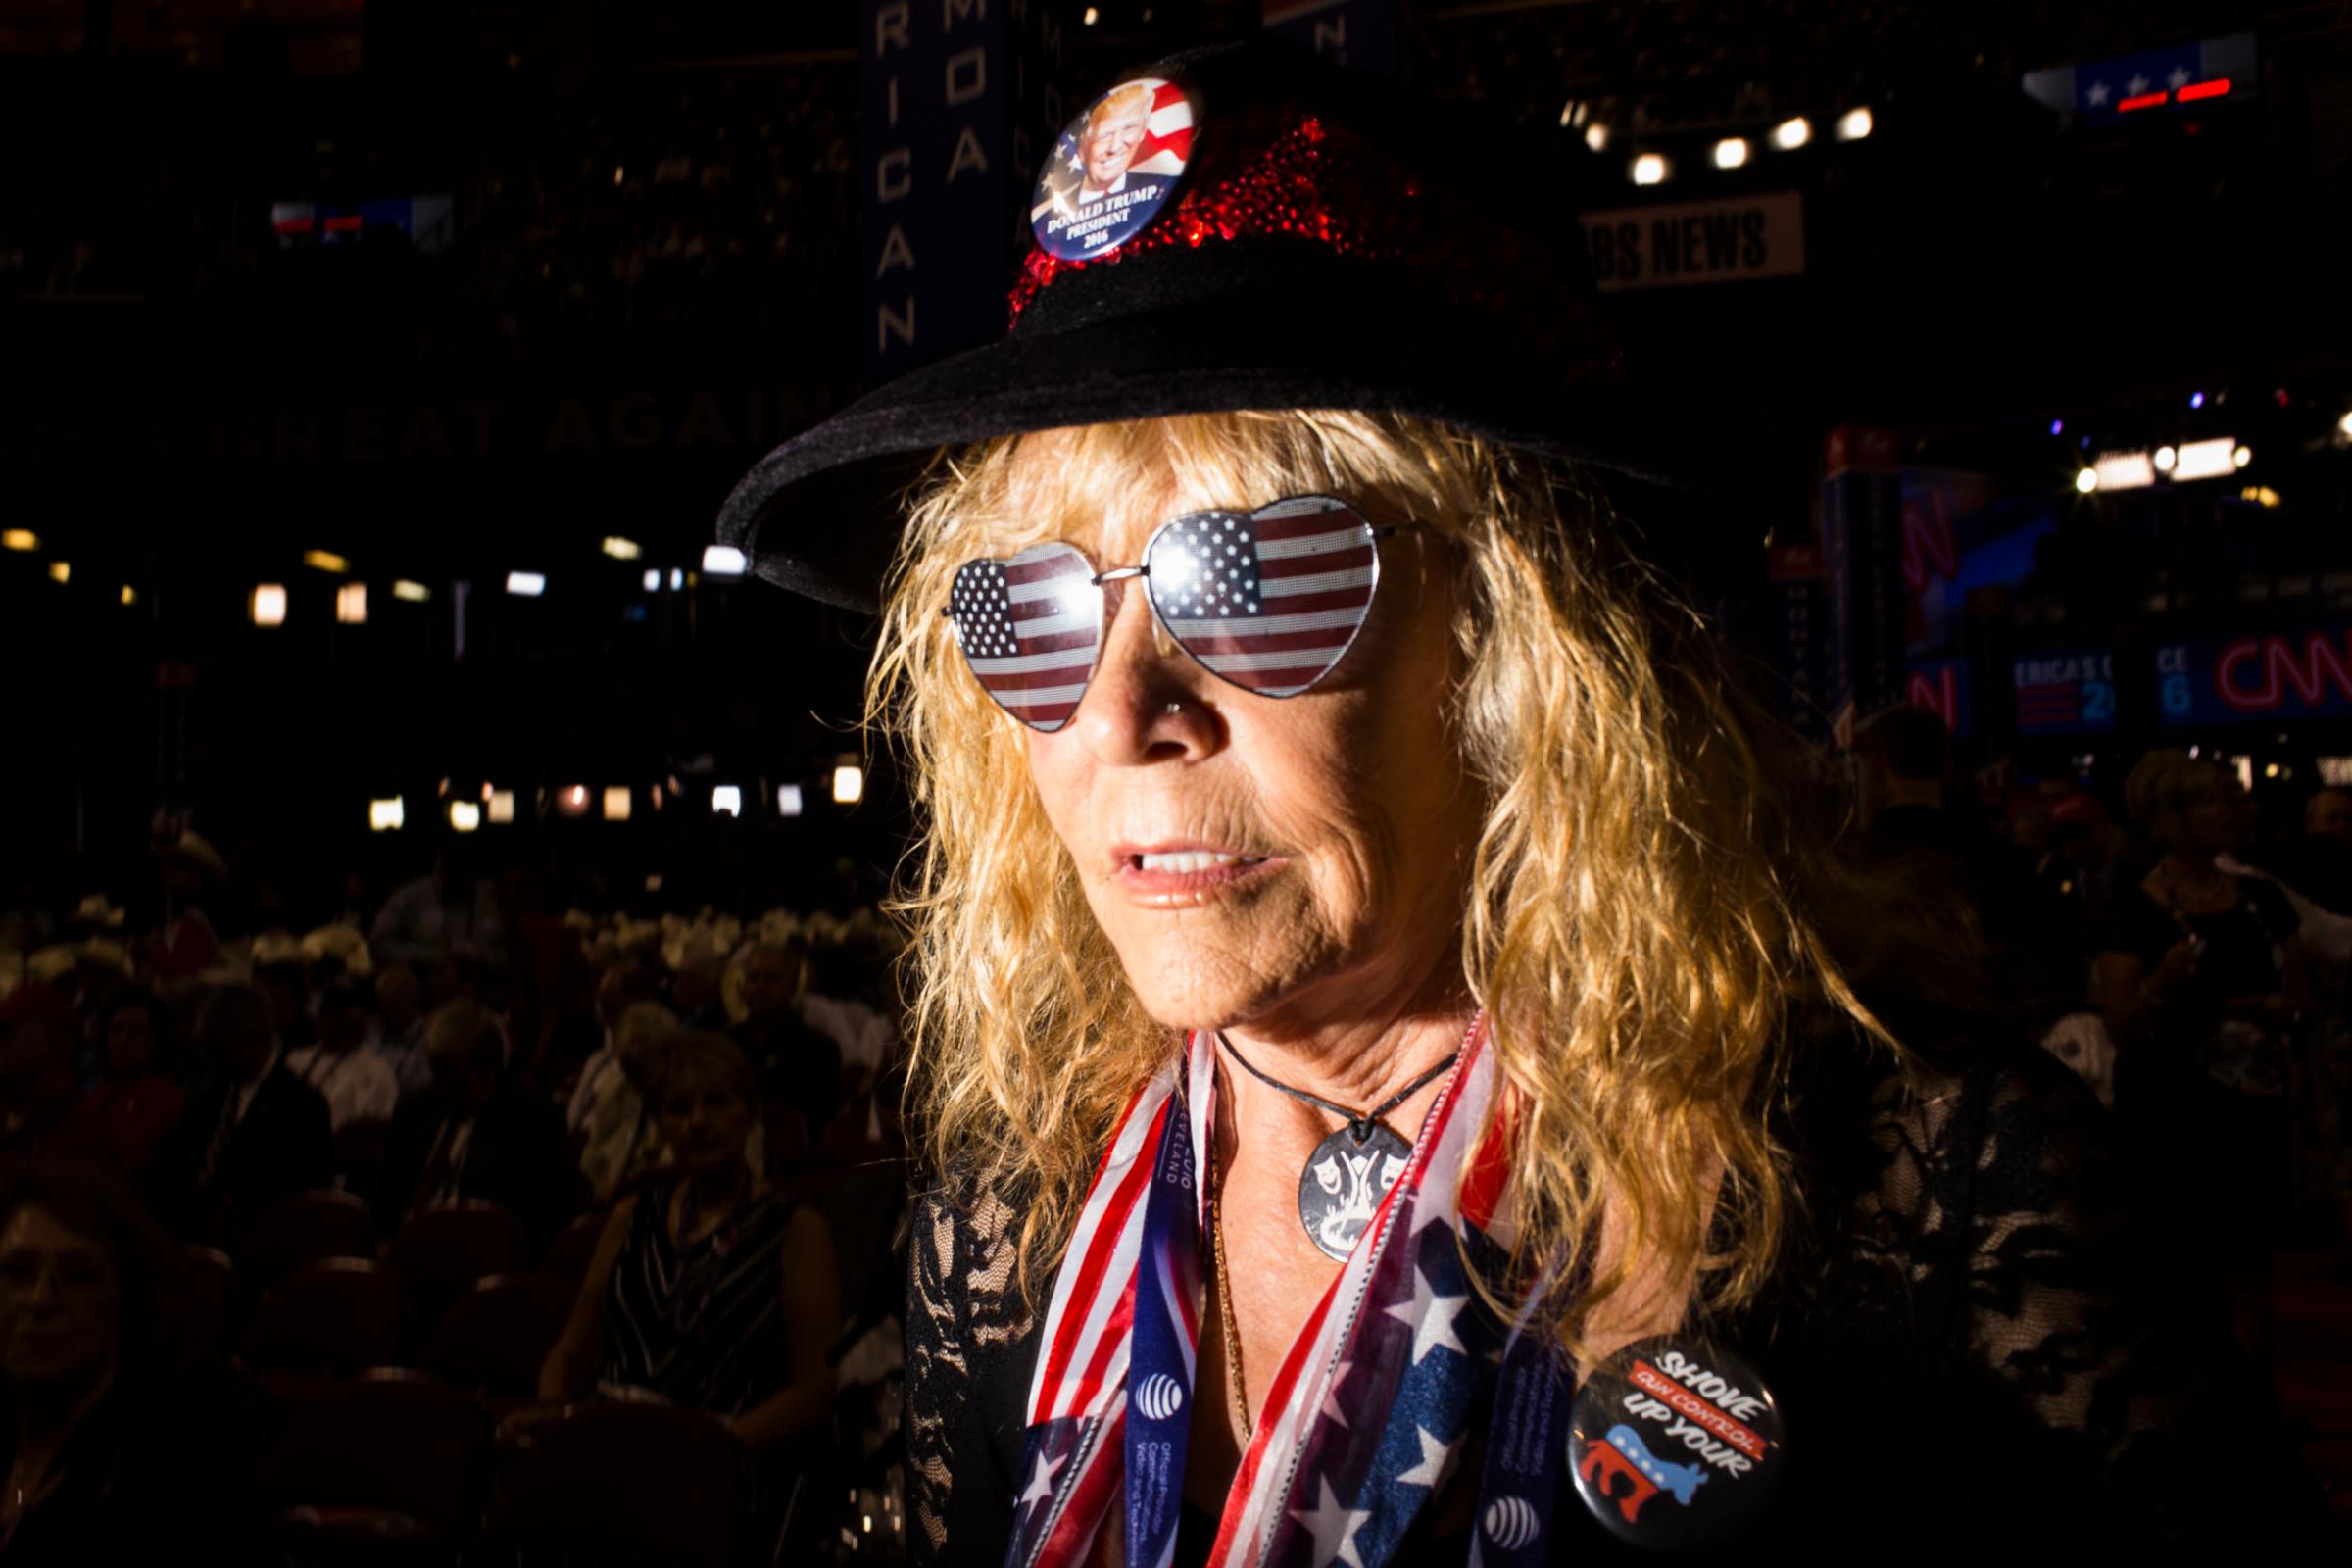 Flags are an essential theme at the 2016 Republican National Convention on Monday, July 18, 2016, in Cleveland.